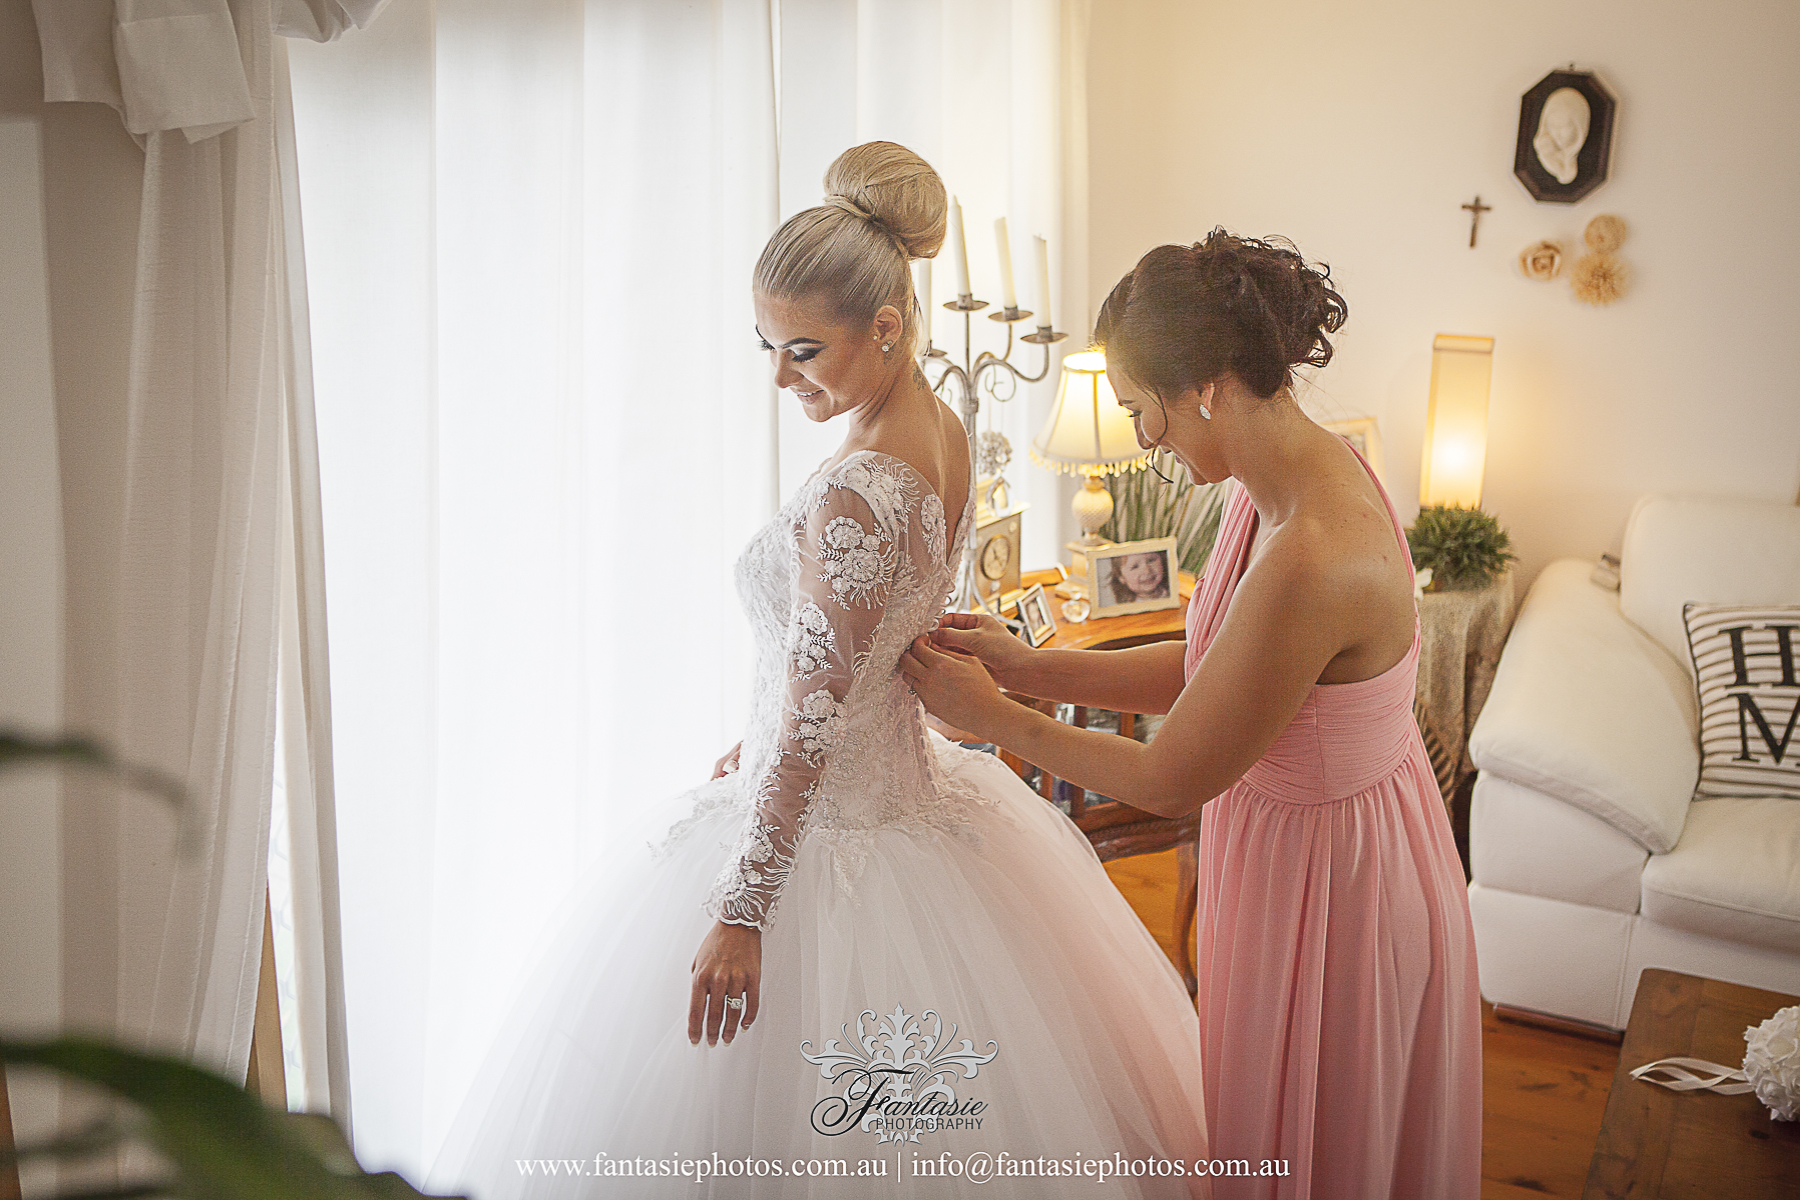 Beautiful bride and maid of honor getting ready at home